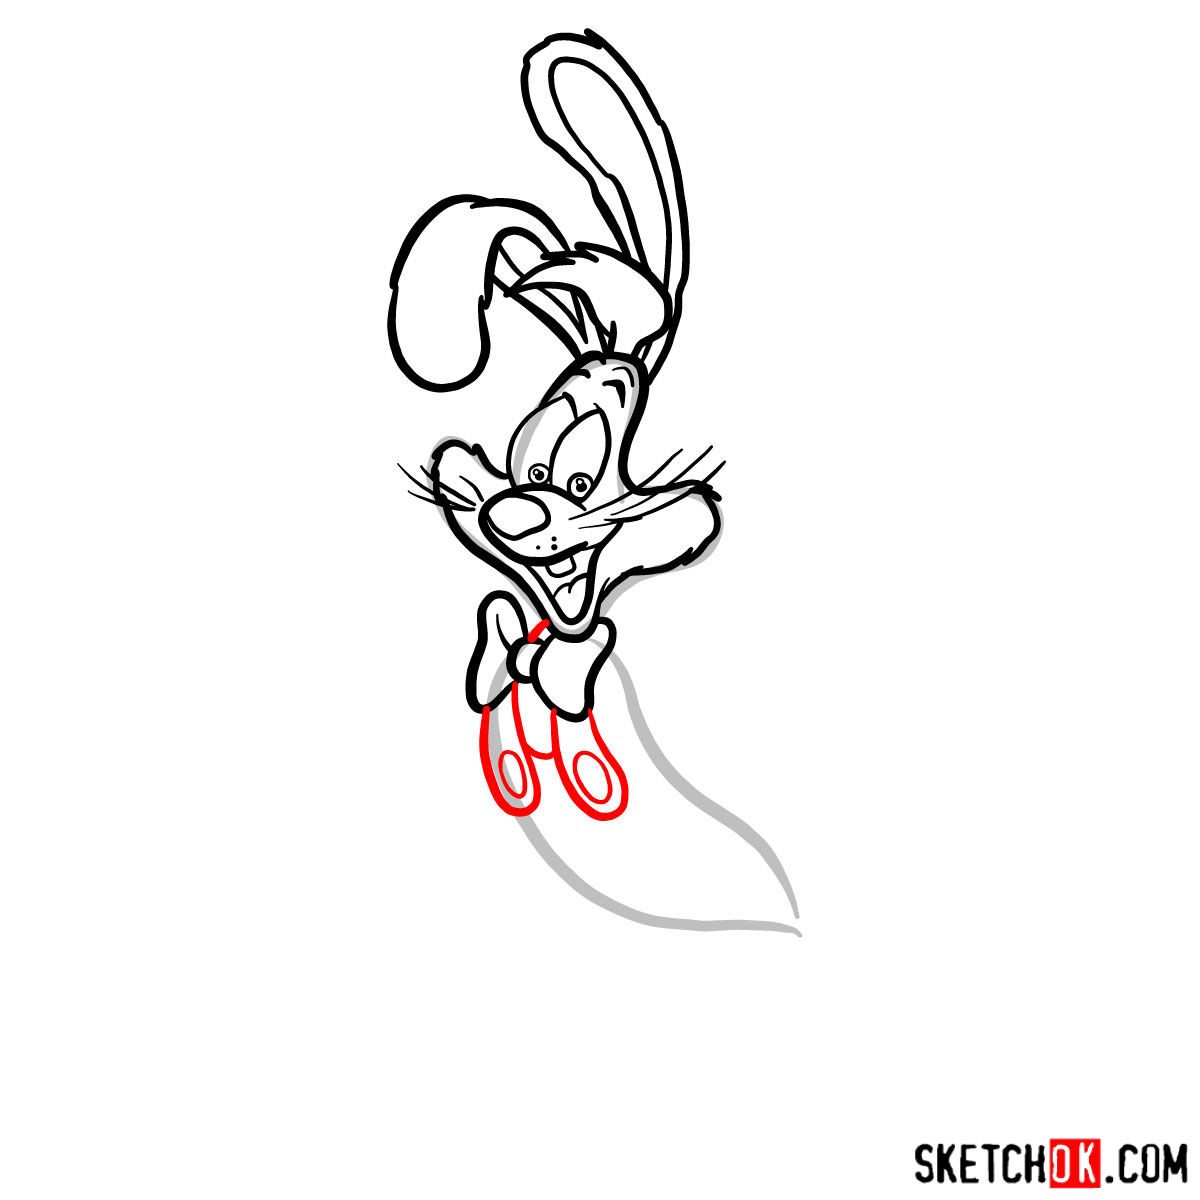 How to draw Roger Rabbit - step 07